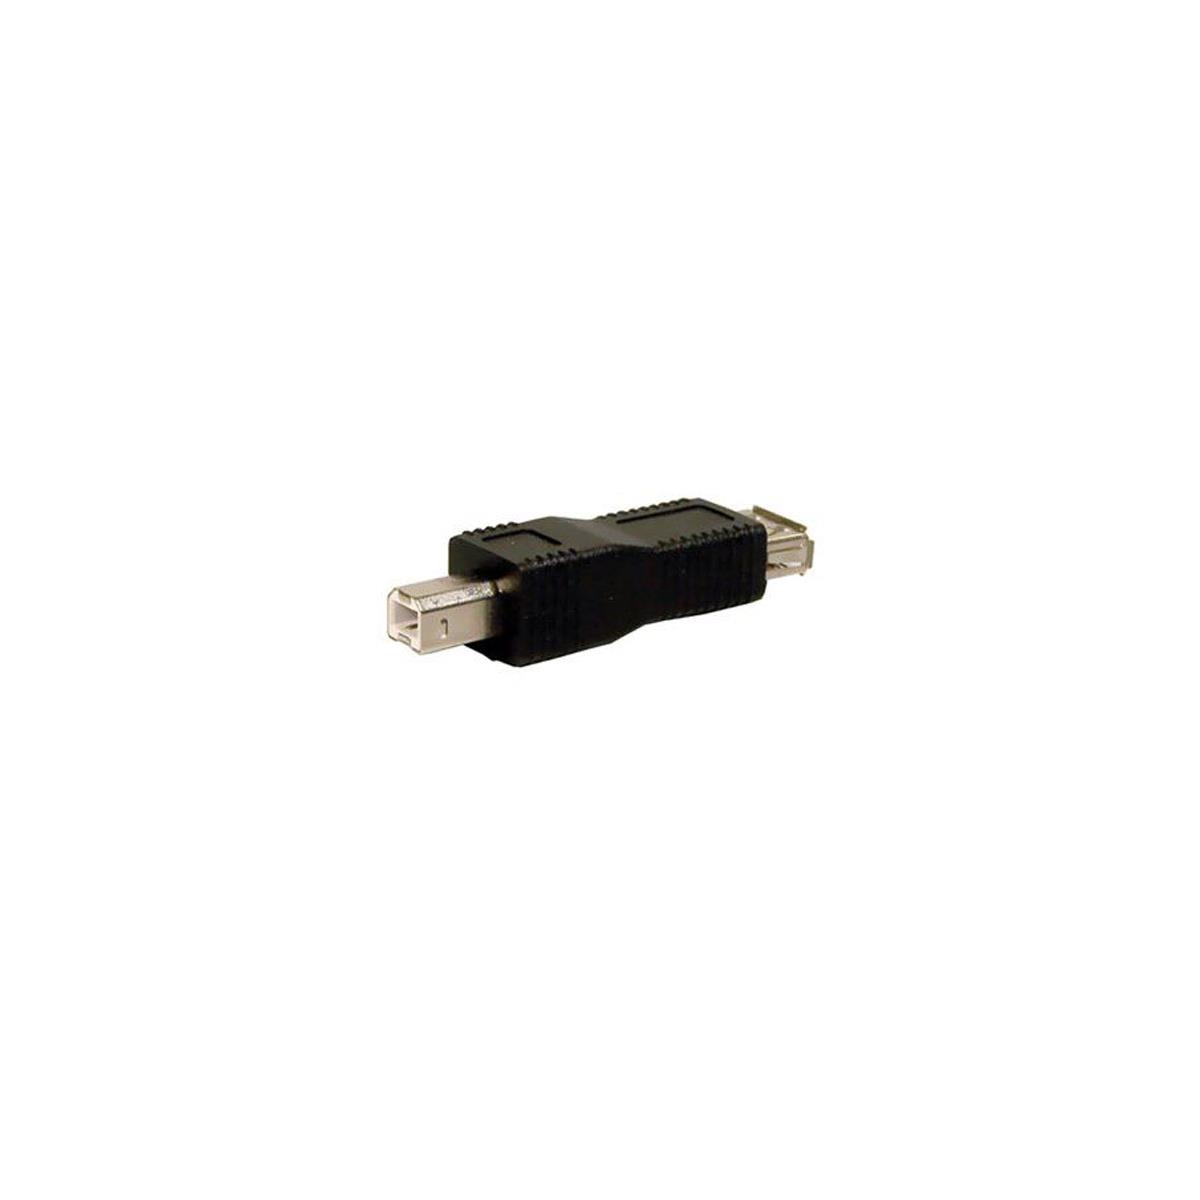 

Comprehensive USB A Female to B Male Adapter